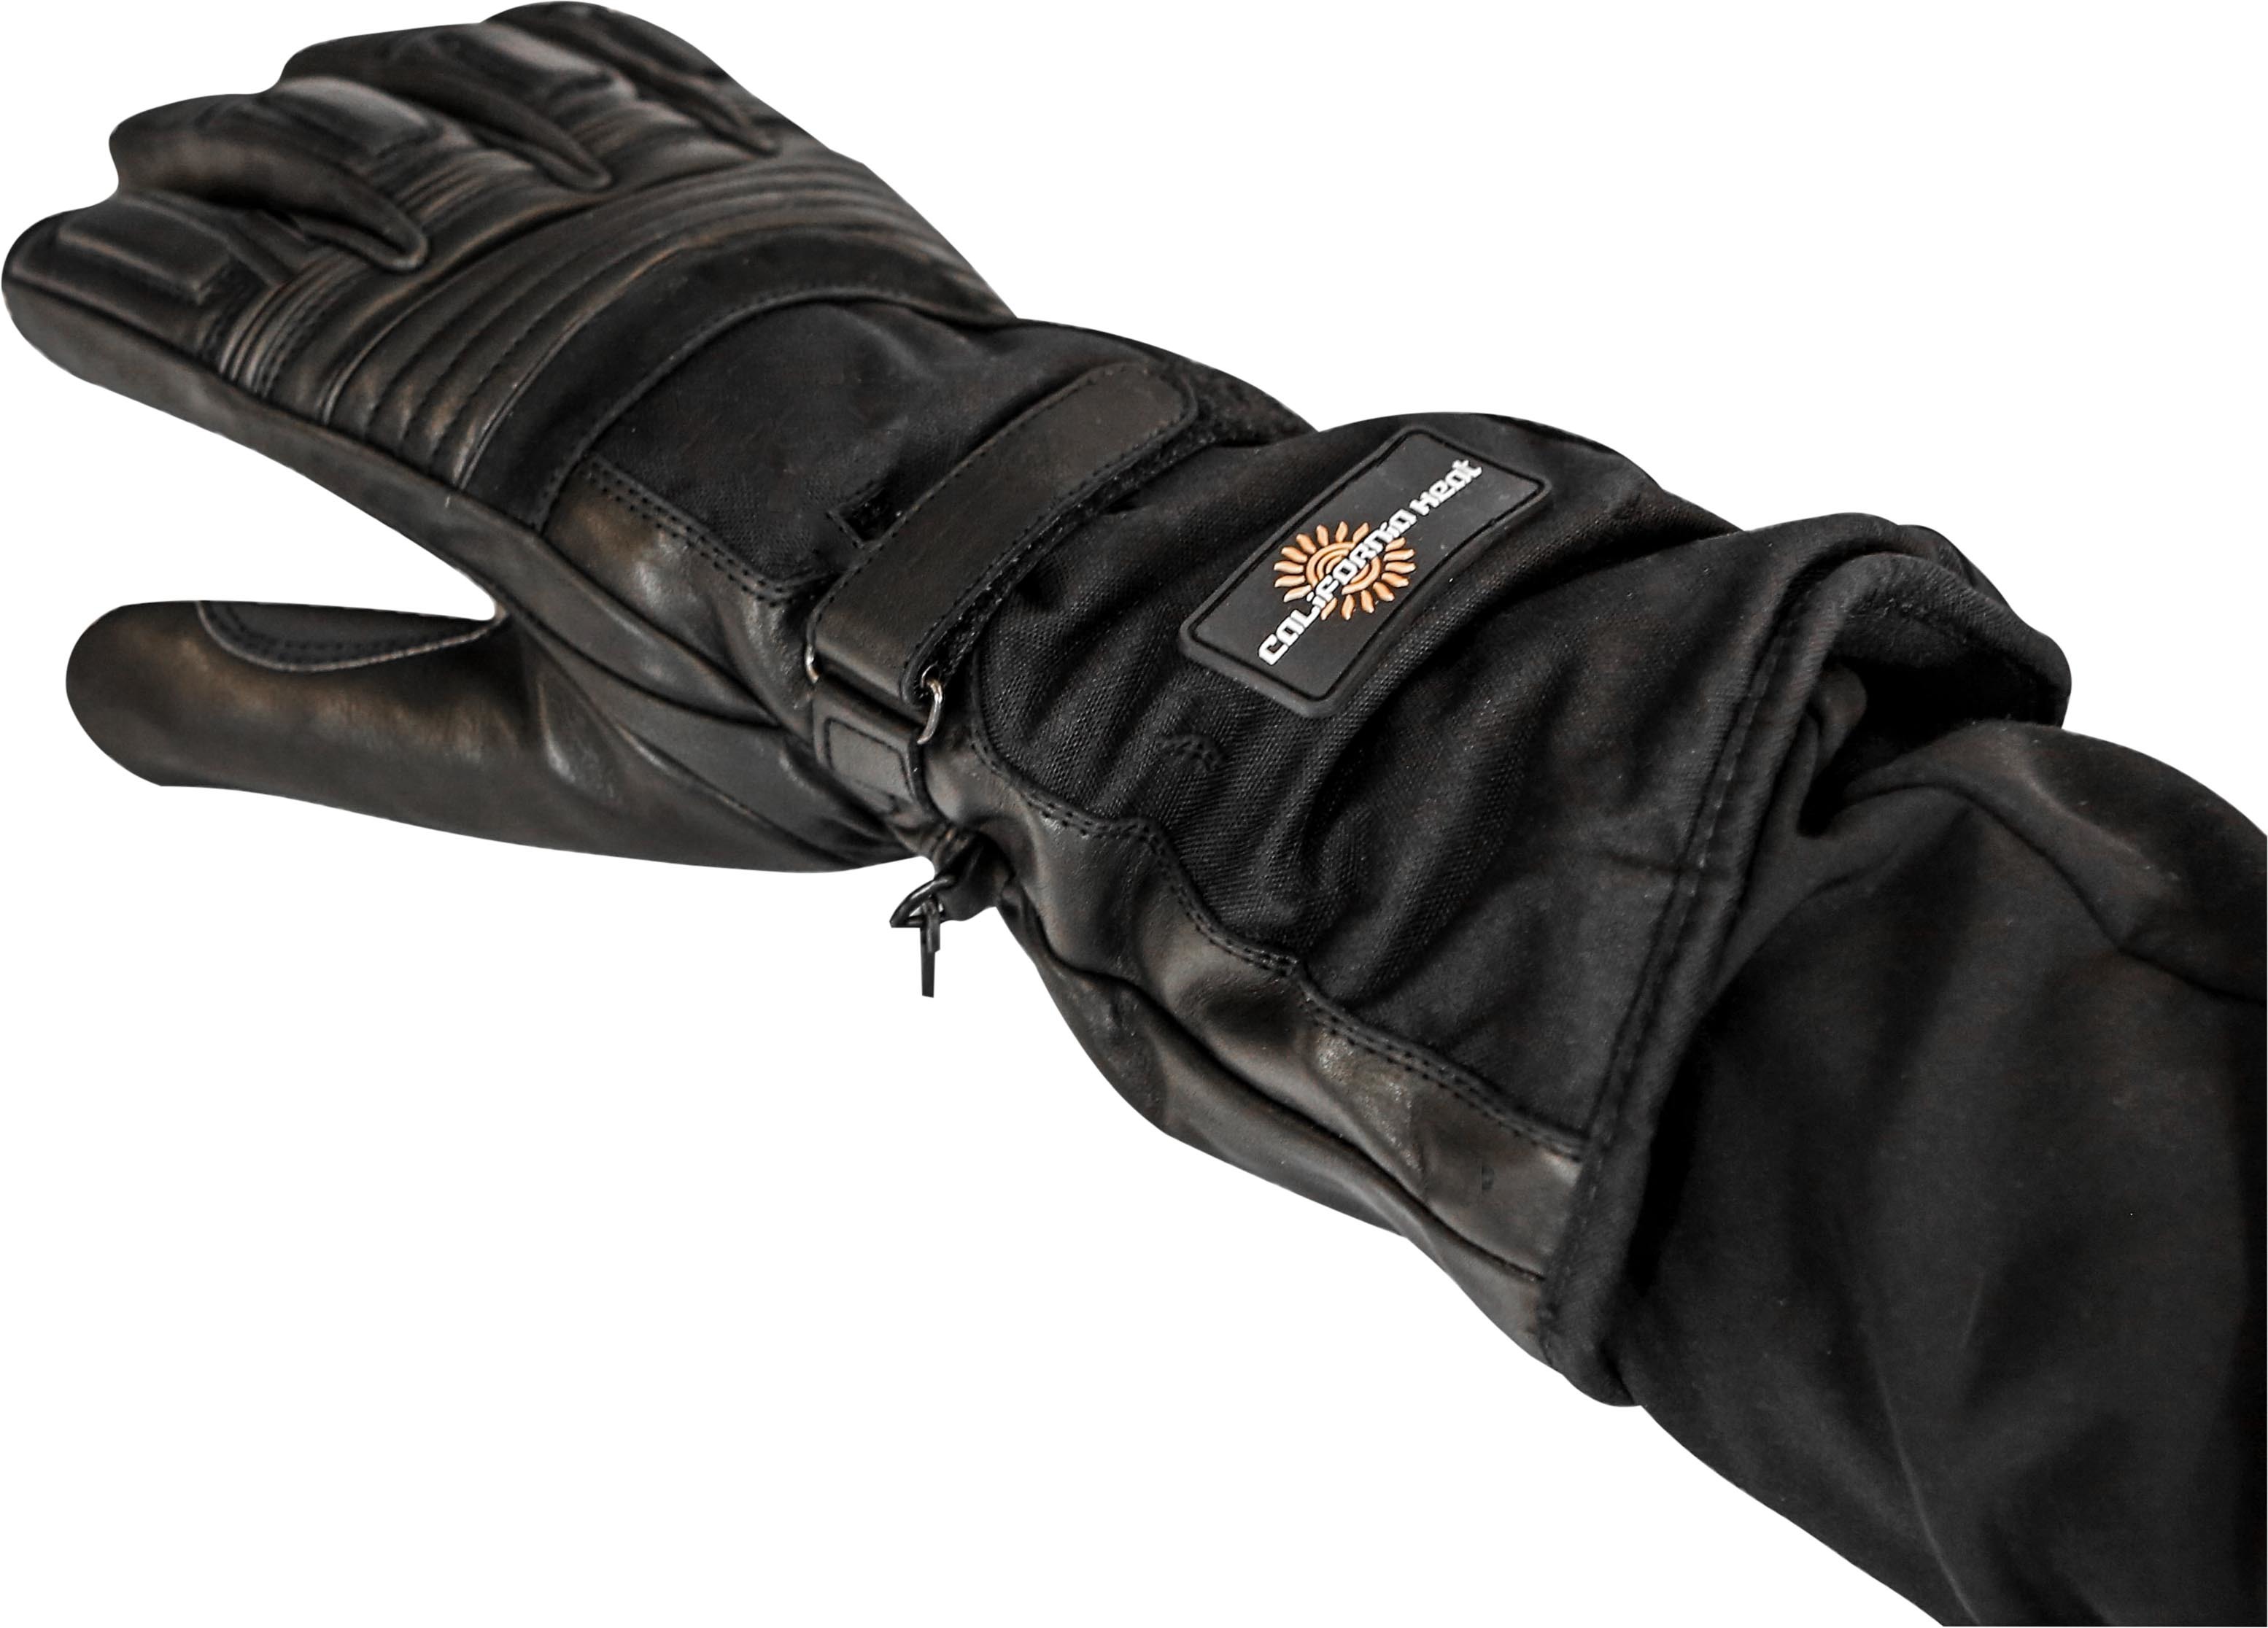 12V Heated Gauntlet Gloves Black Small - Click Image to Close